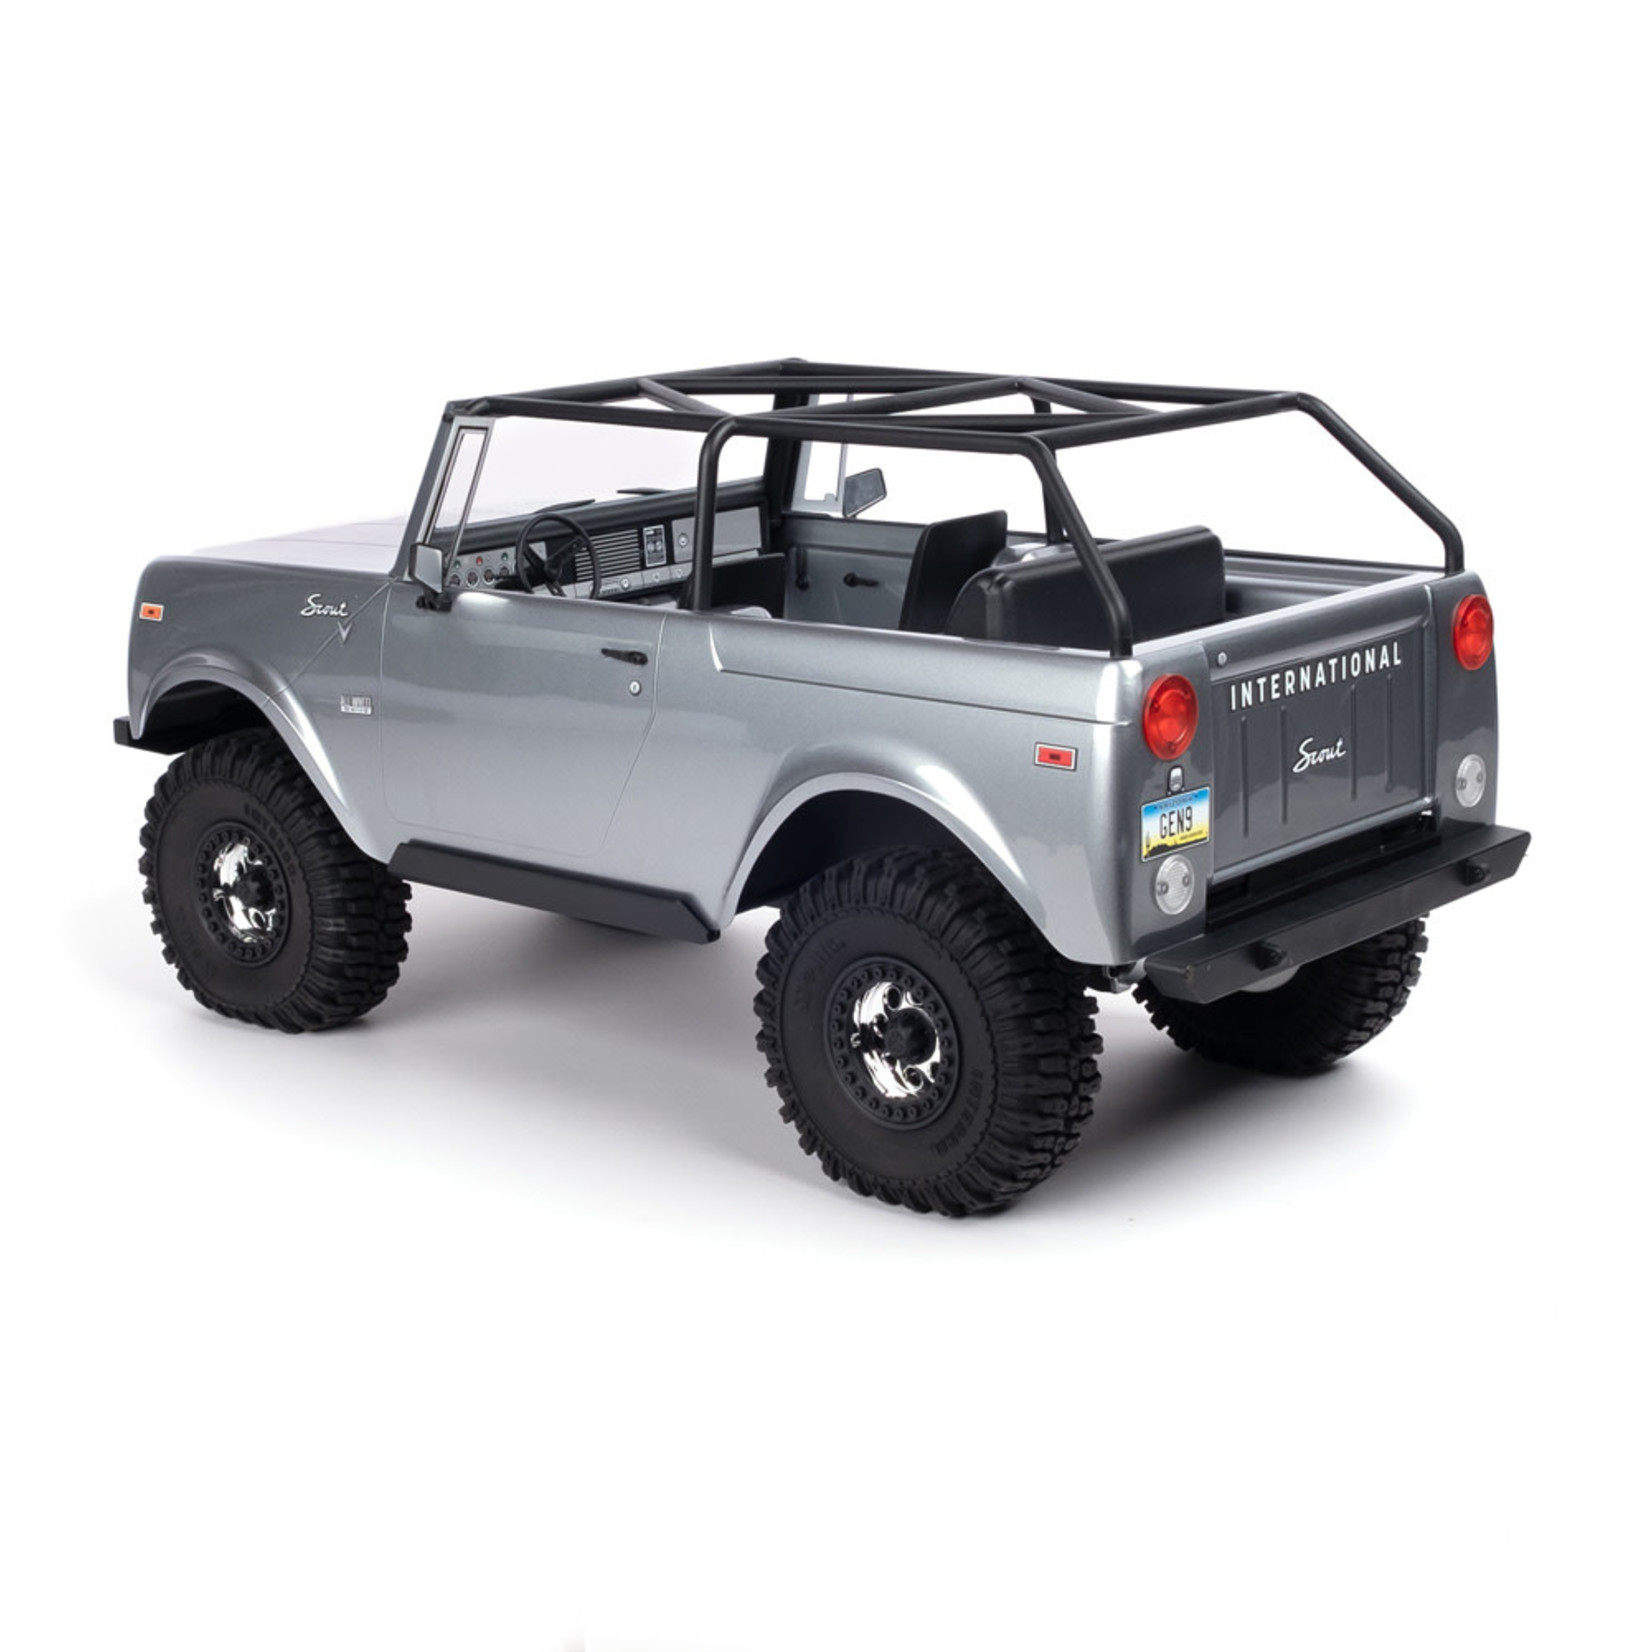 Redcat Racing Redcat Gen9 Scout 800A 1/10 4WD RTR Scale Rock Crawler (Gray) w/2.4GHz Radio #GEN9-GRAY